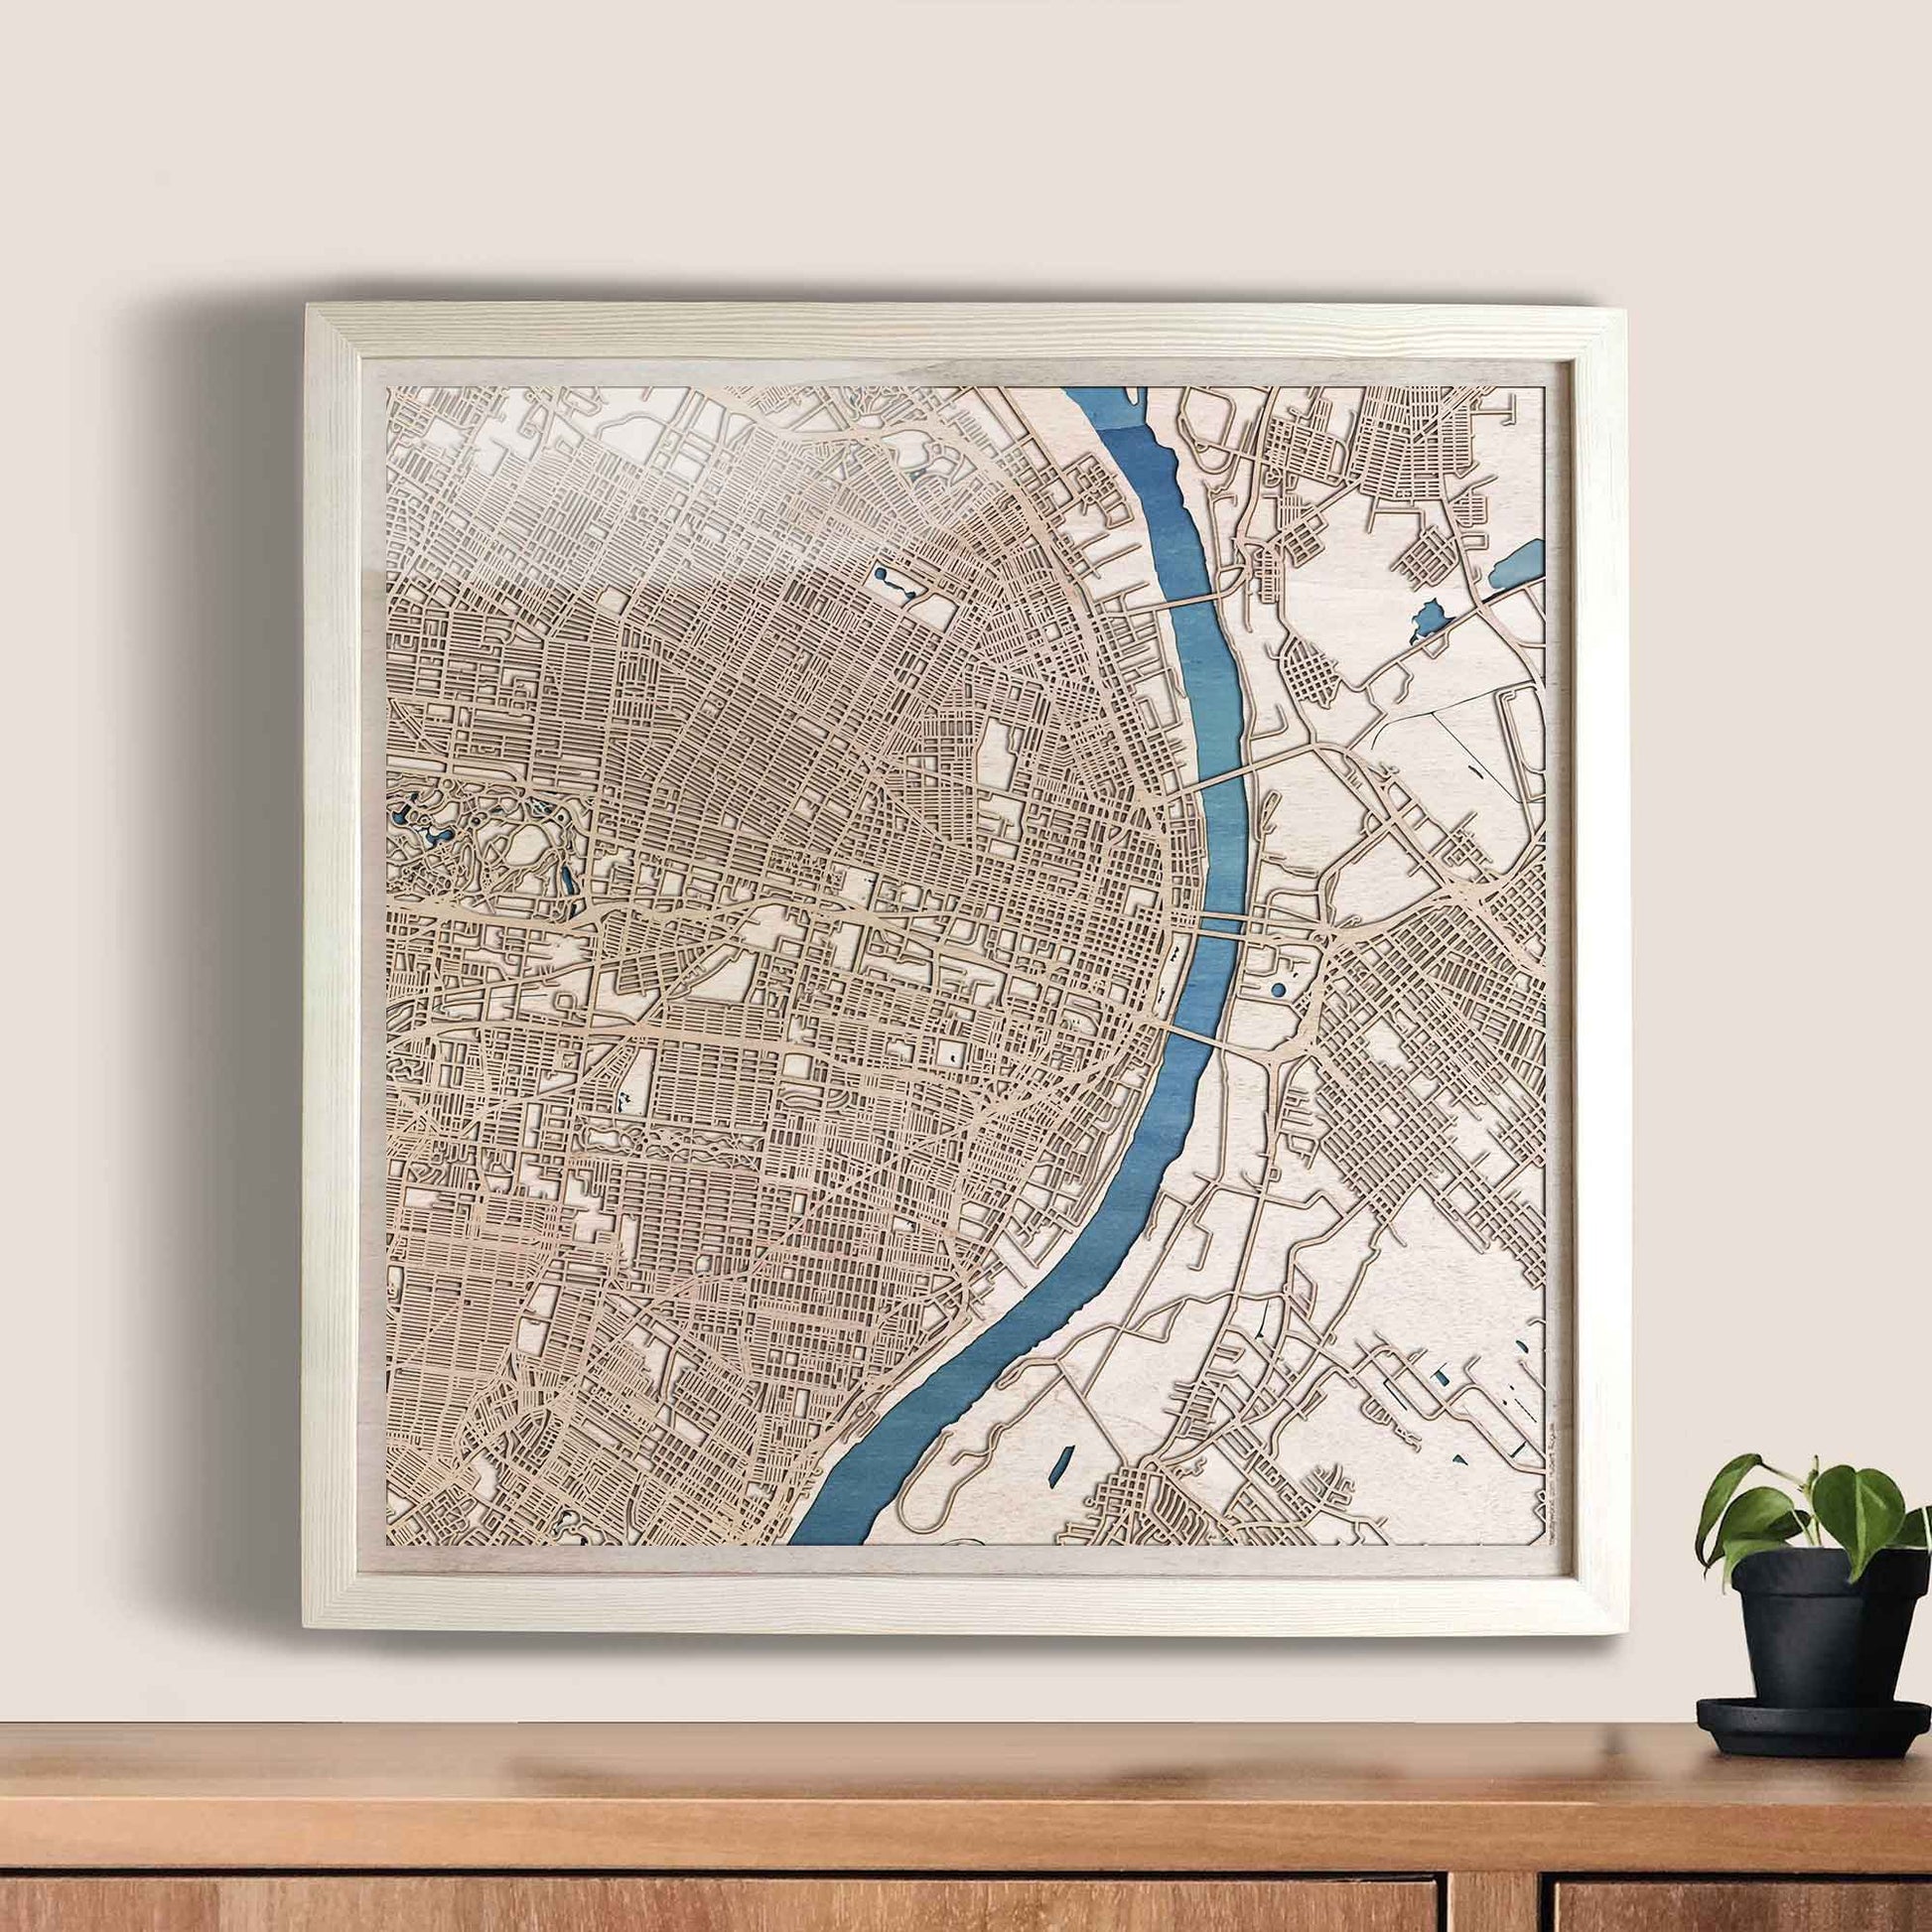 St Louis Wooden Map by CityWood - Custom Wood Map Art - Unique Laser Cut Engraved - Anniversary Gift